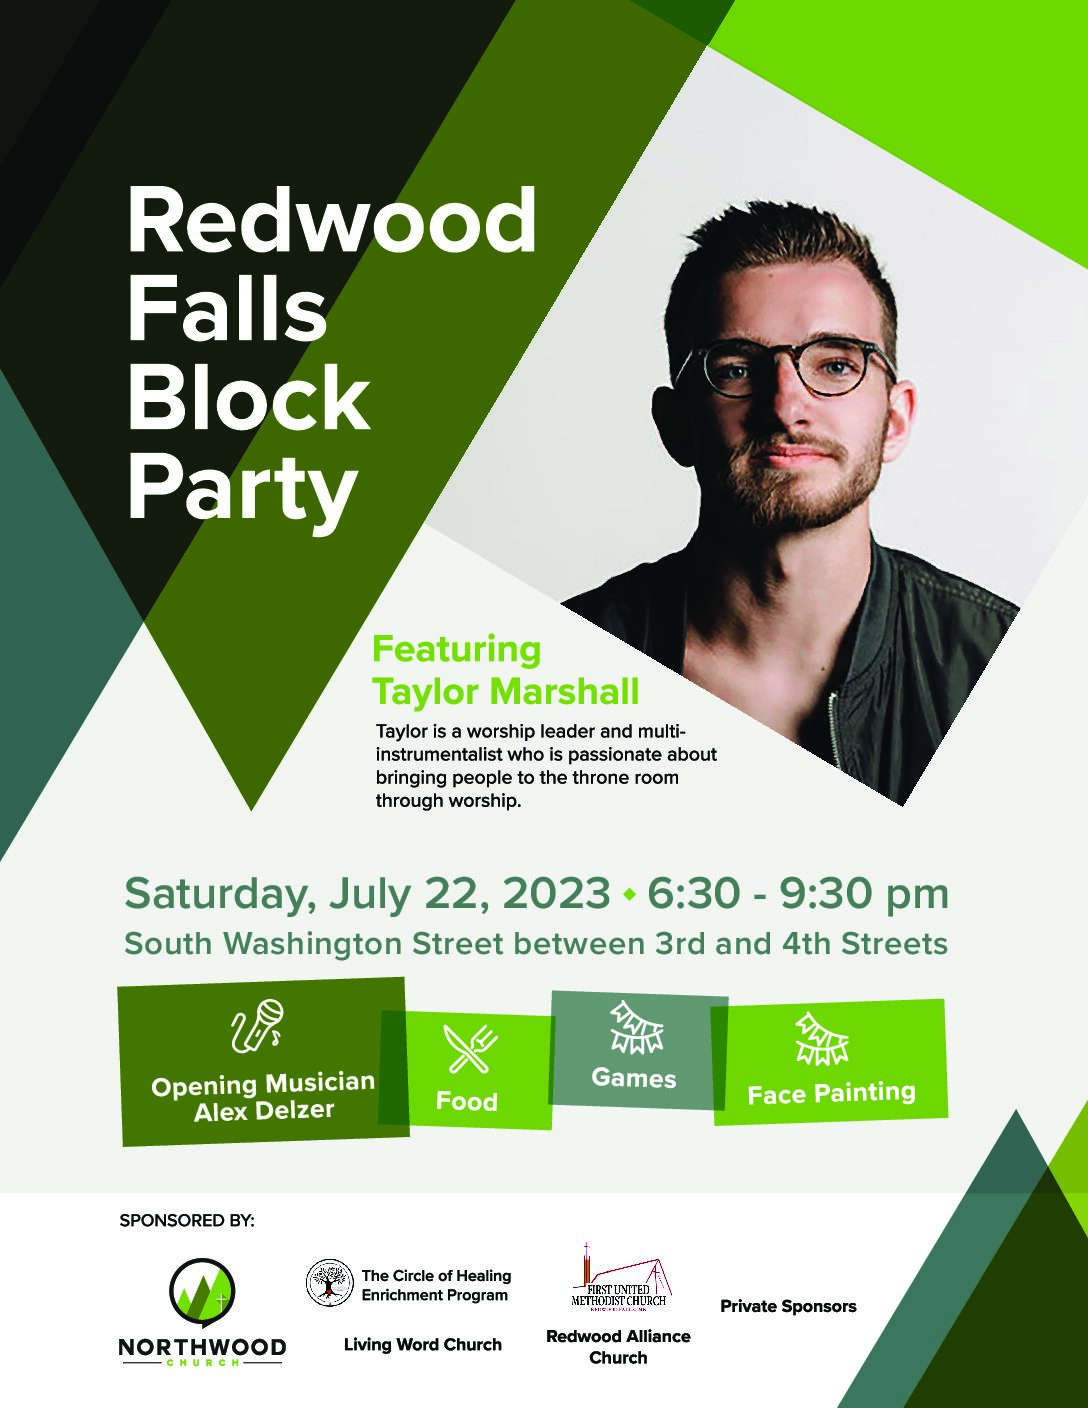 <h1 class="tribe-events-single-event-title">Redwood Falls Block Party</h1>